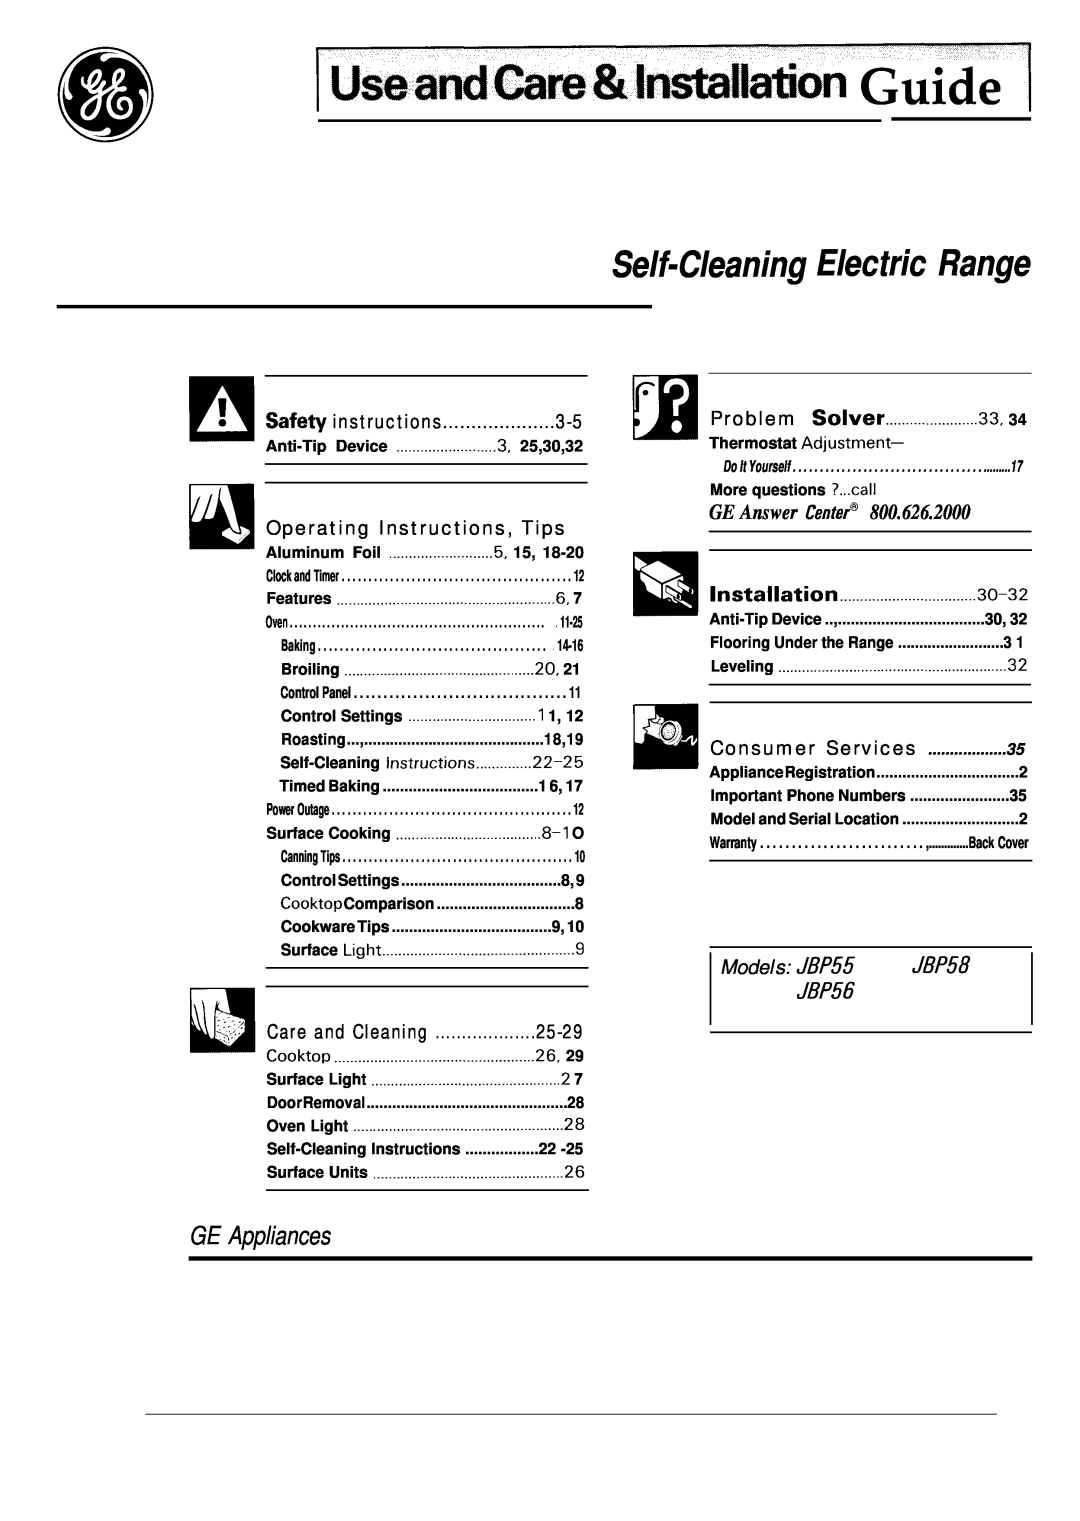 GE JBP56 operating instructions I Useandtire&ln*llation Guide, Self-Cleaning Electric Range, GE Appliances, 3O.32, 25-29 